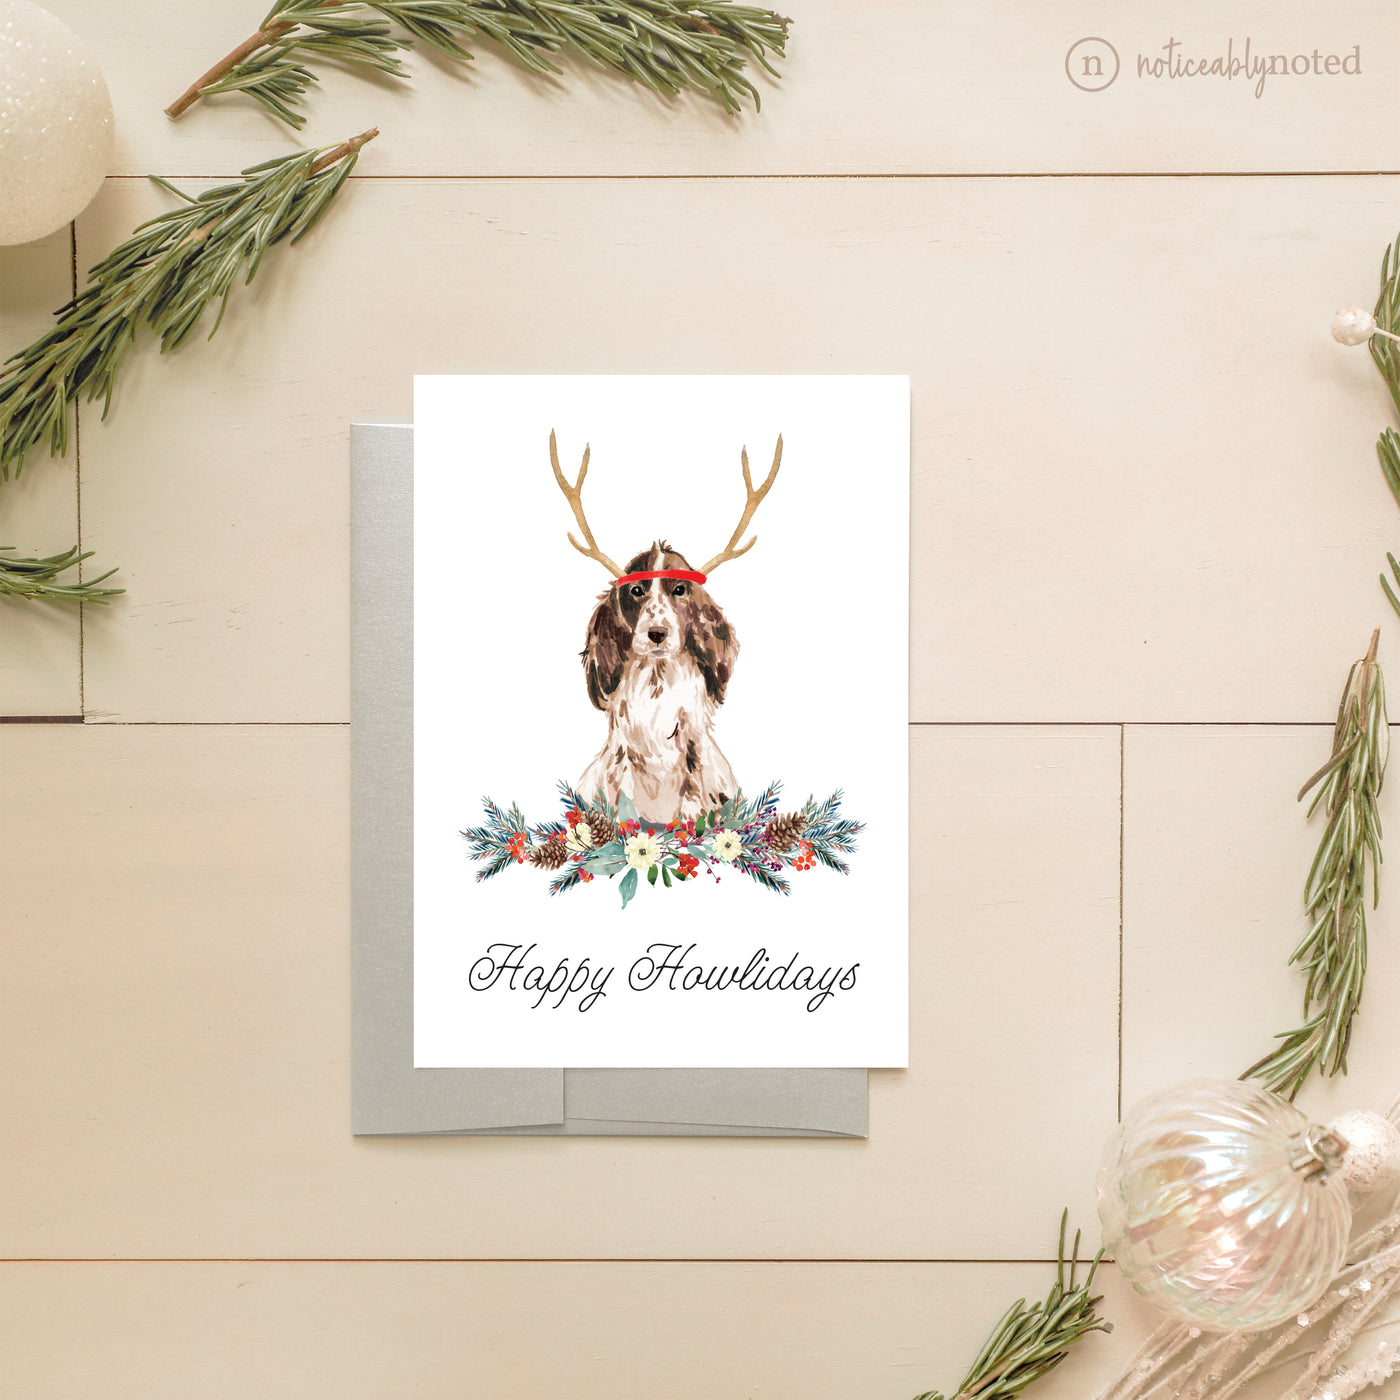 Cocker Spaniel Dog Holiday Card | Noticeably Noted